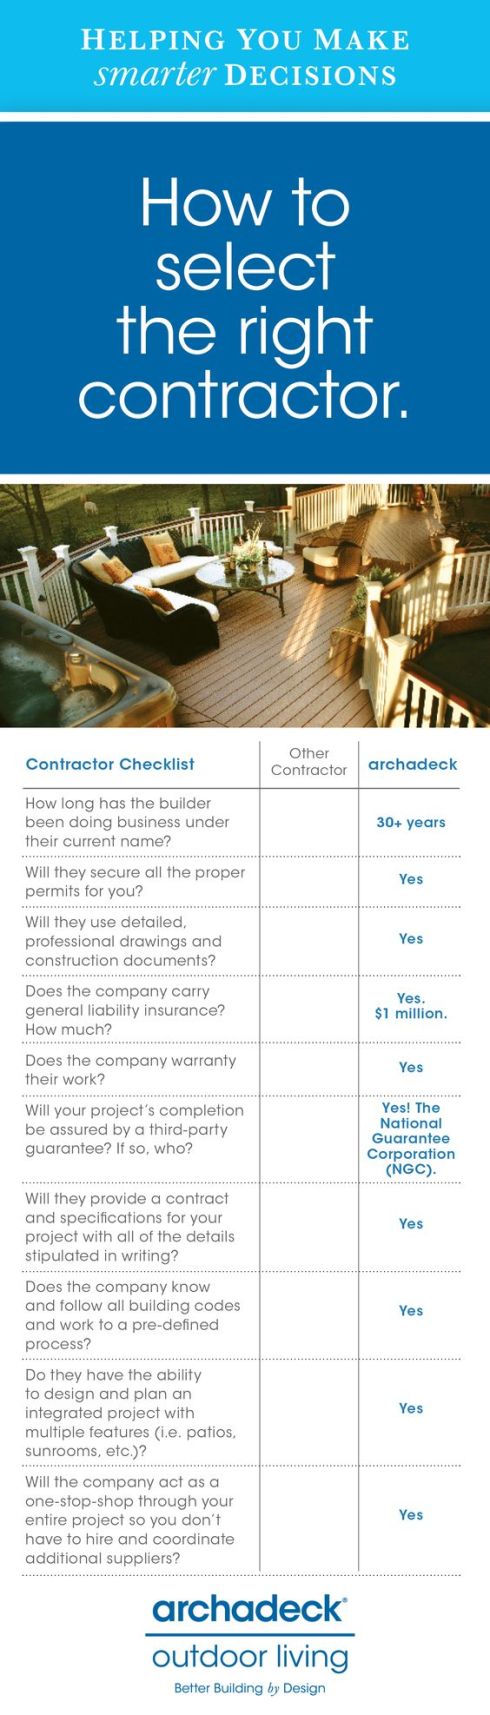 How To Select The Right Contractor by Archadeck